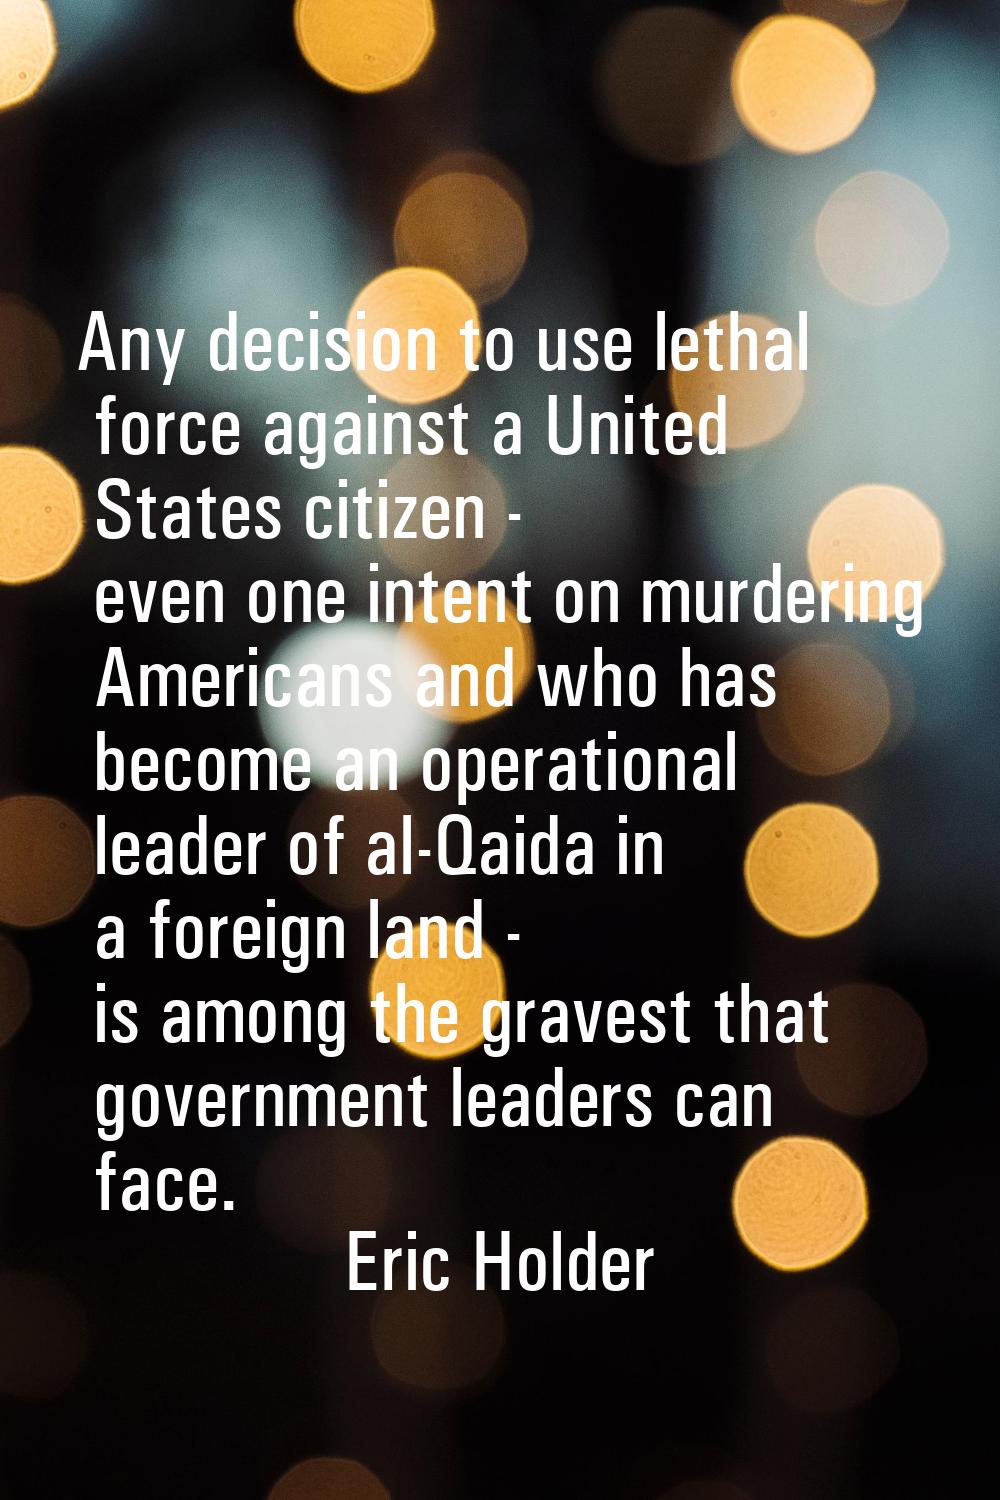 Any decision to use lethal force against a United States citizen - even one intent on murdering Ame